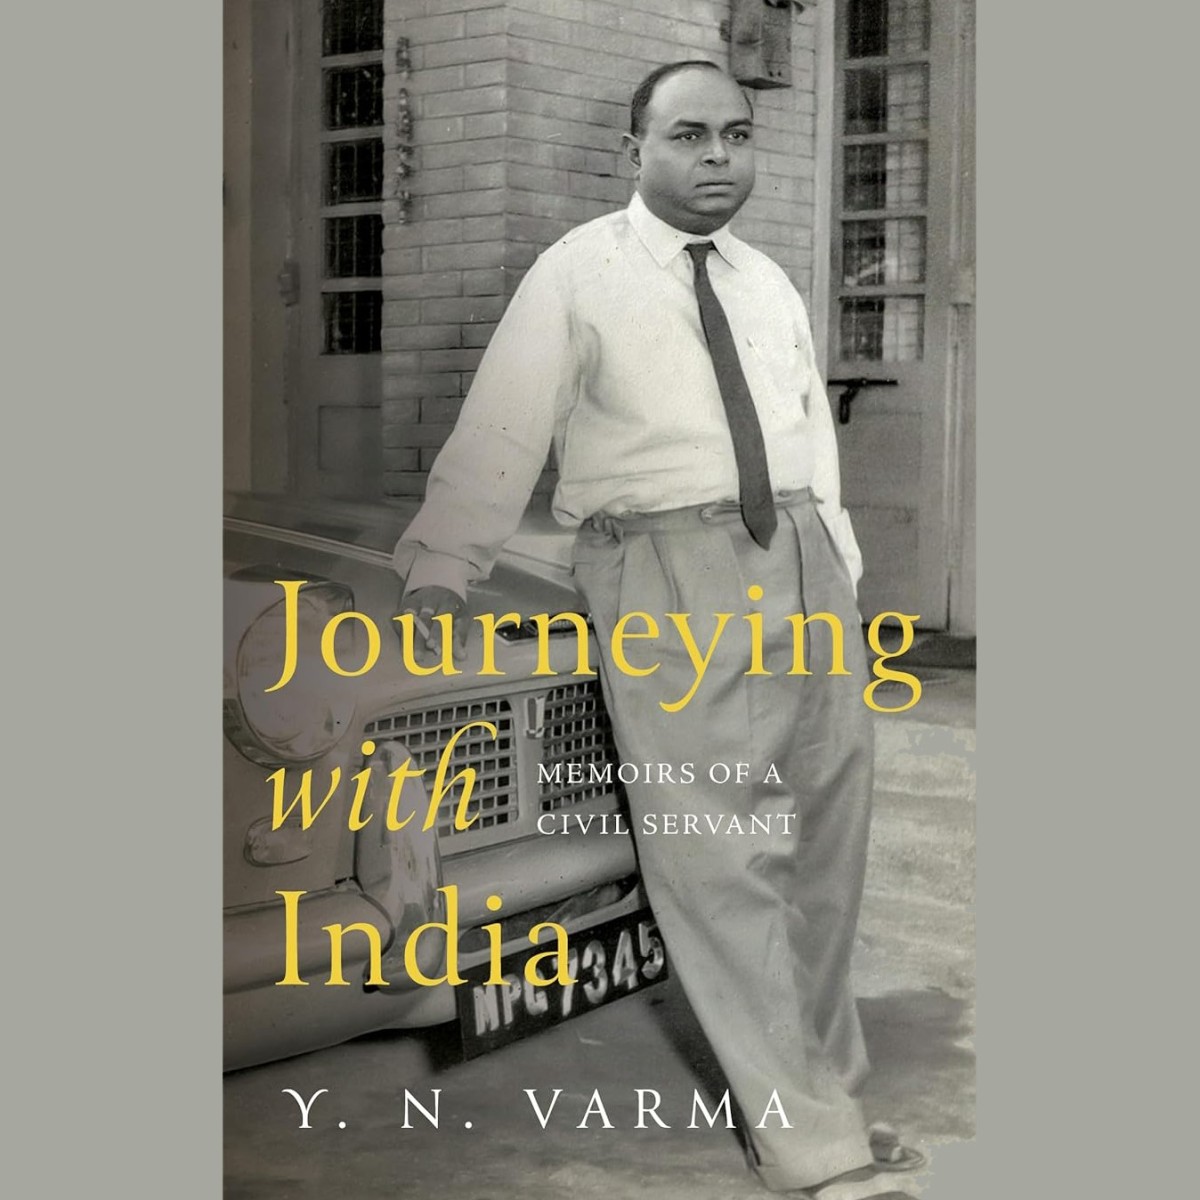 Book Review: Journeying with India